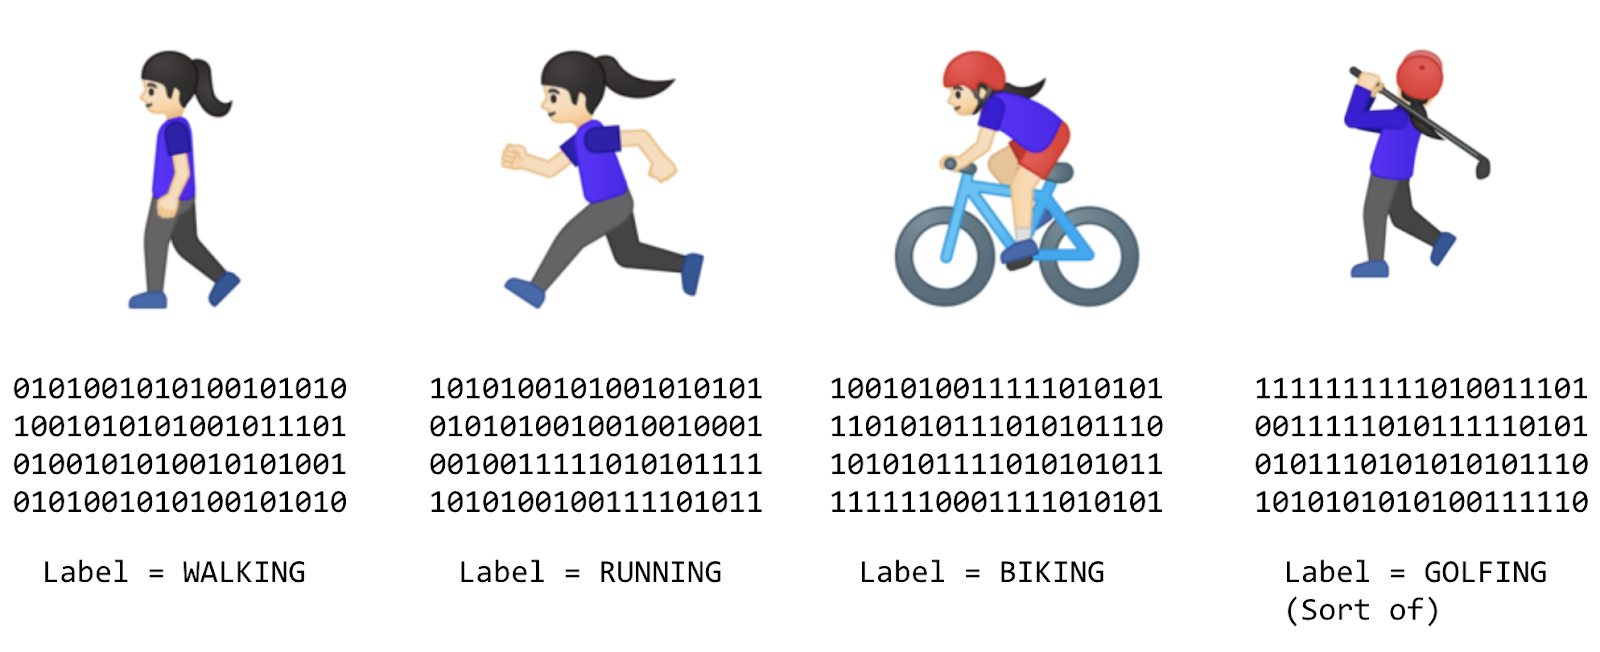 The four labels - walking, running, biking, and golfing - displayed in terms of ones and zeros